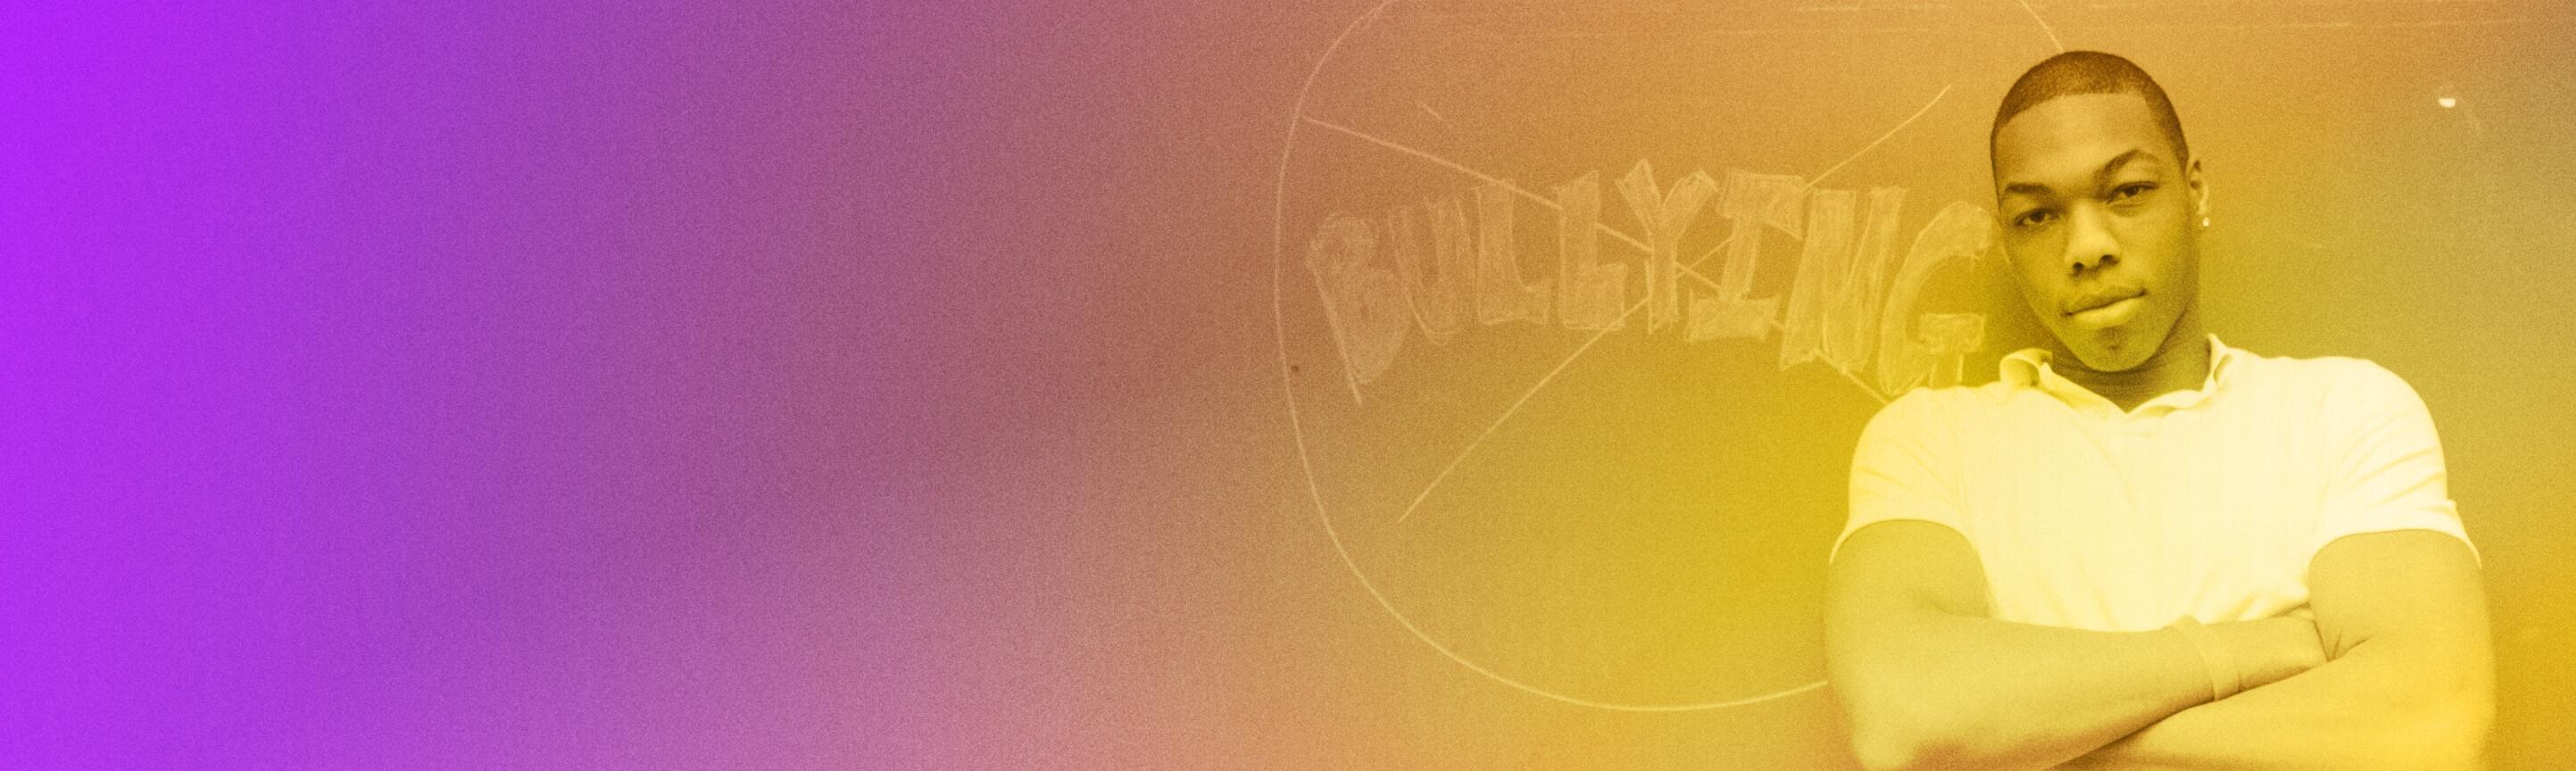 A young person with arms crossed standing in front of a chalkboard with "No Bulllying" written on it, on a purple-yellow gradient